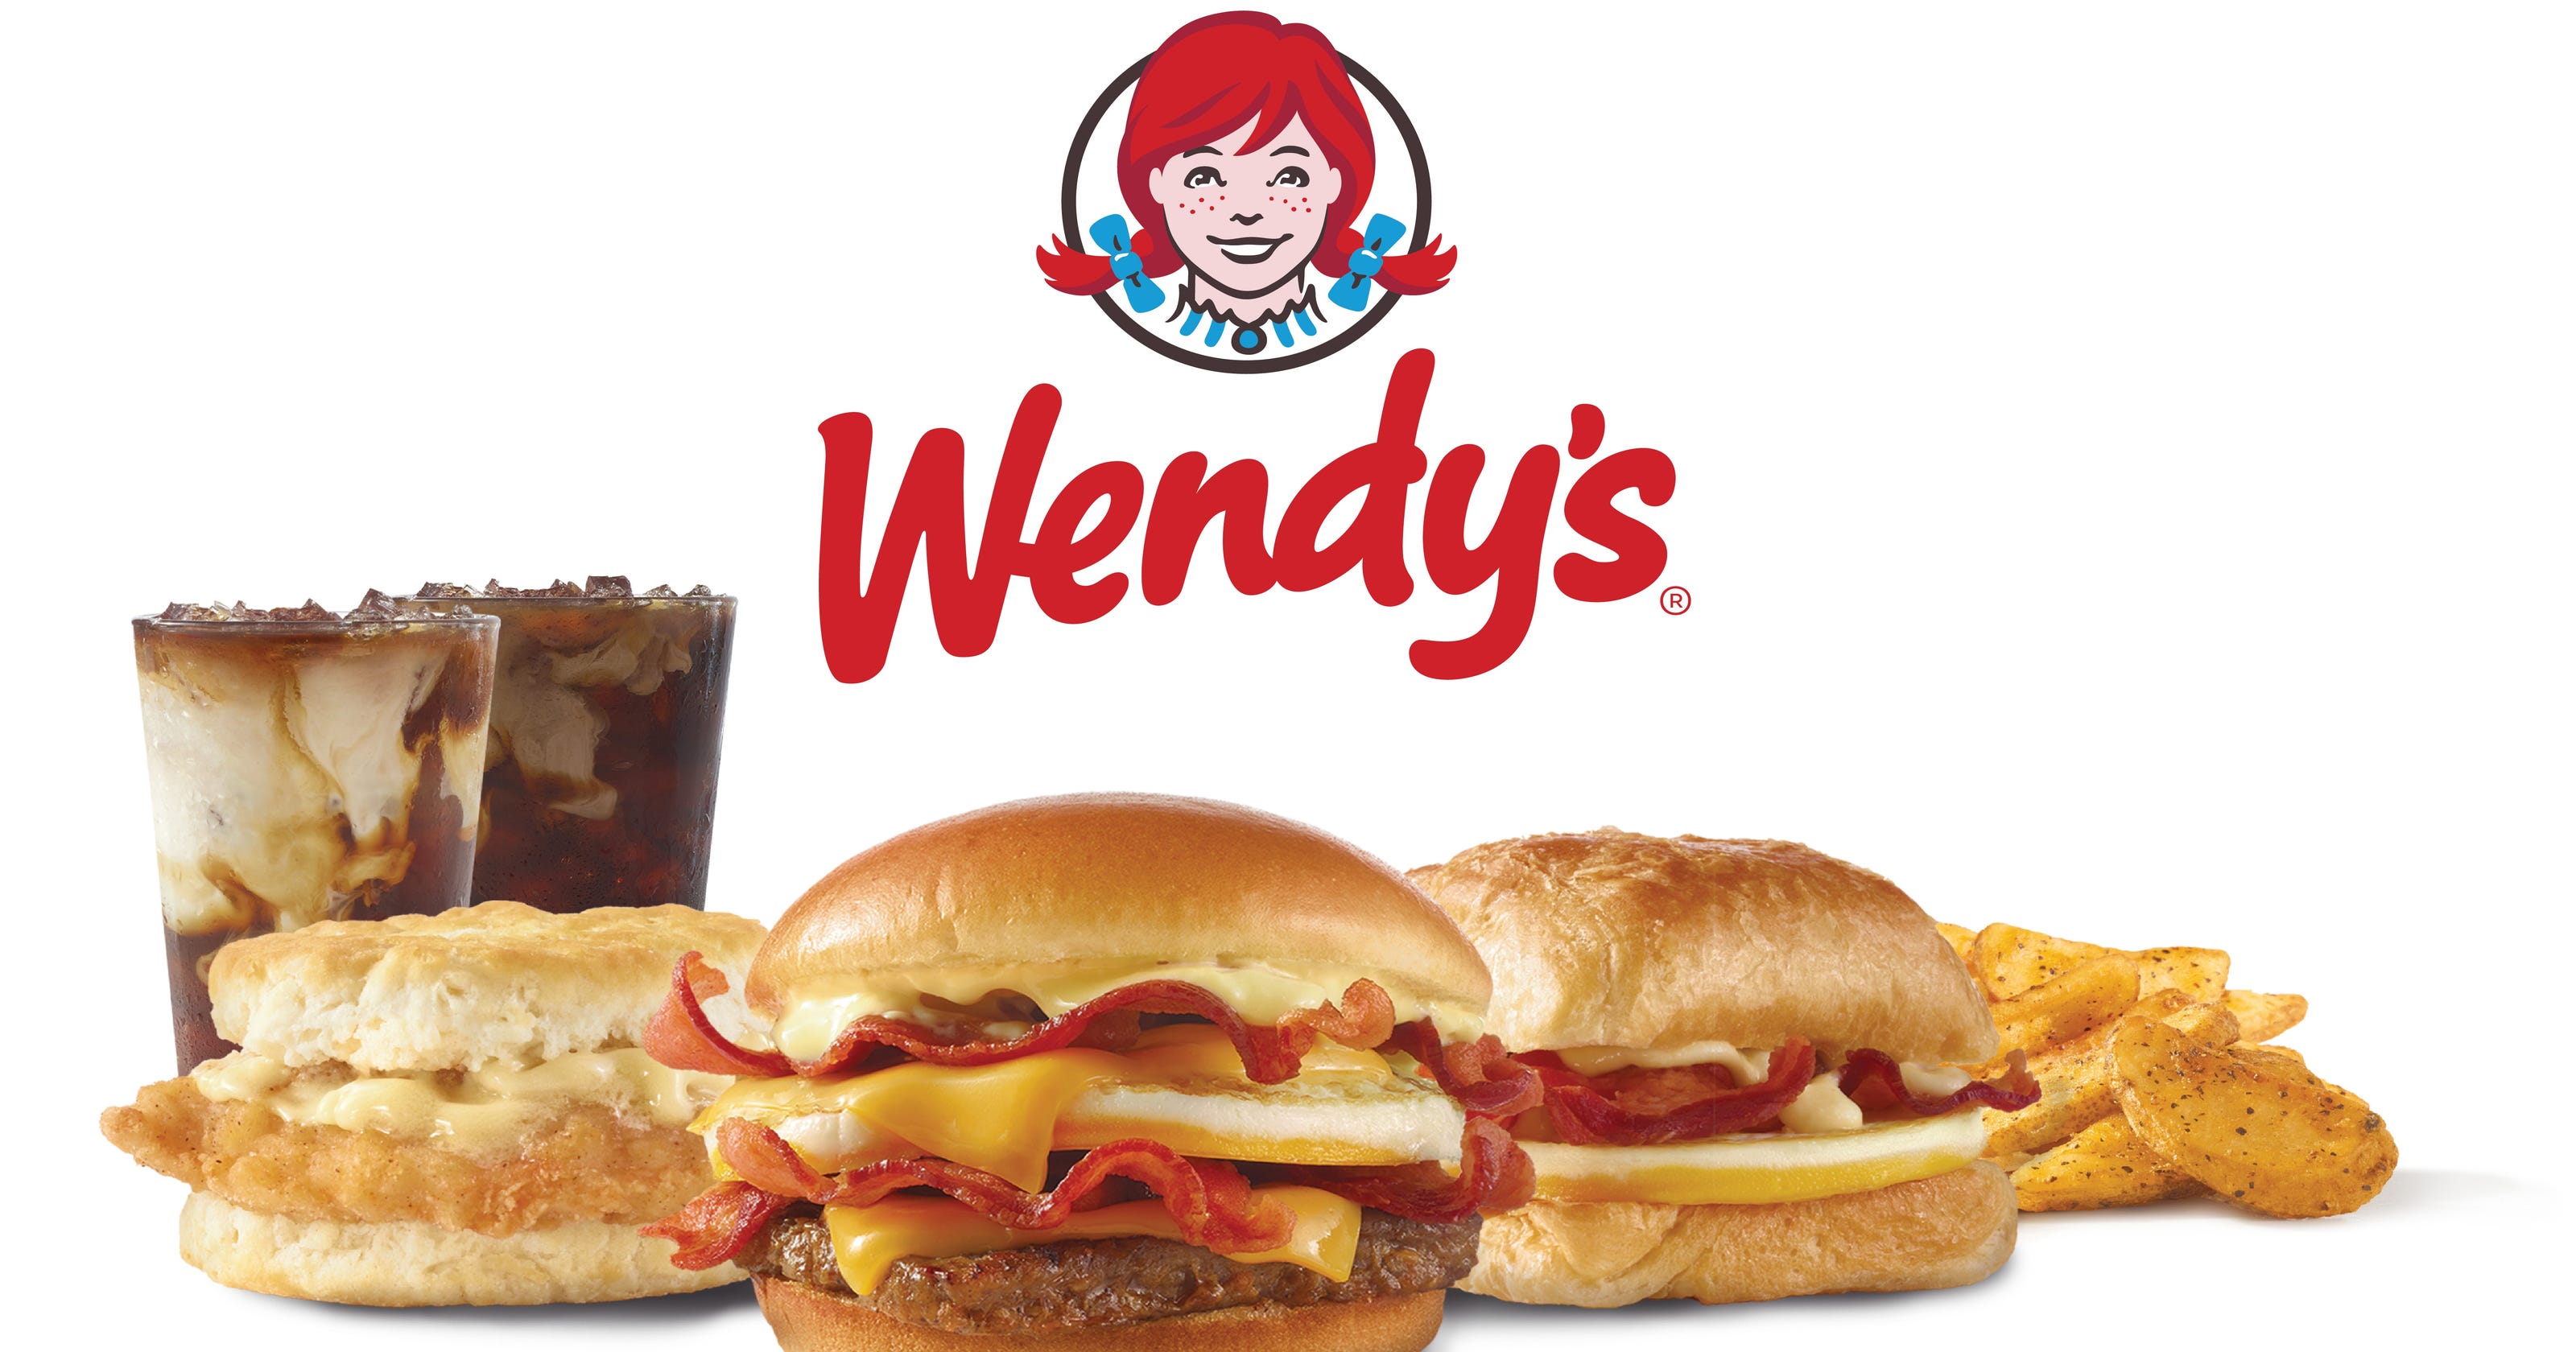 Wendy's breakfast Fast food chain hiring 20,000 new employees